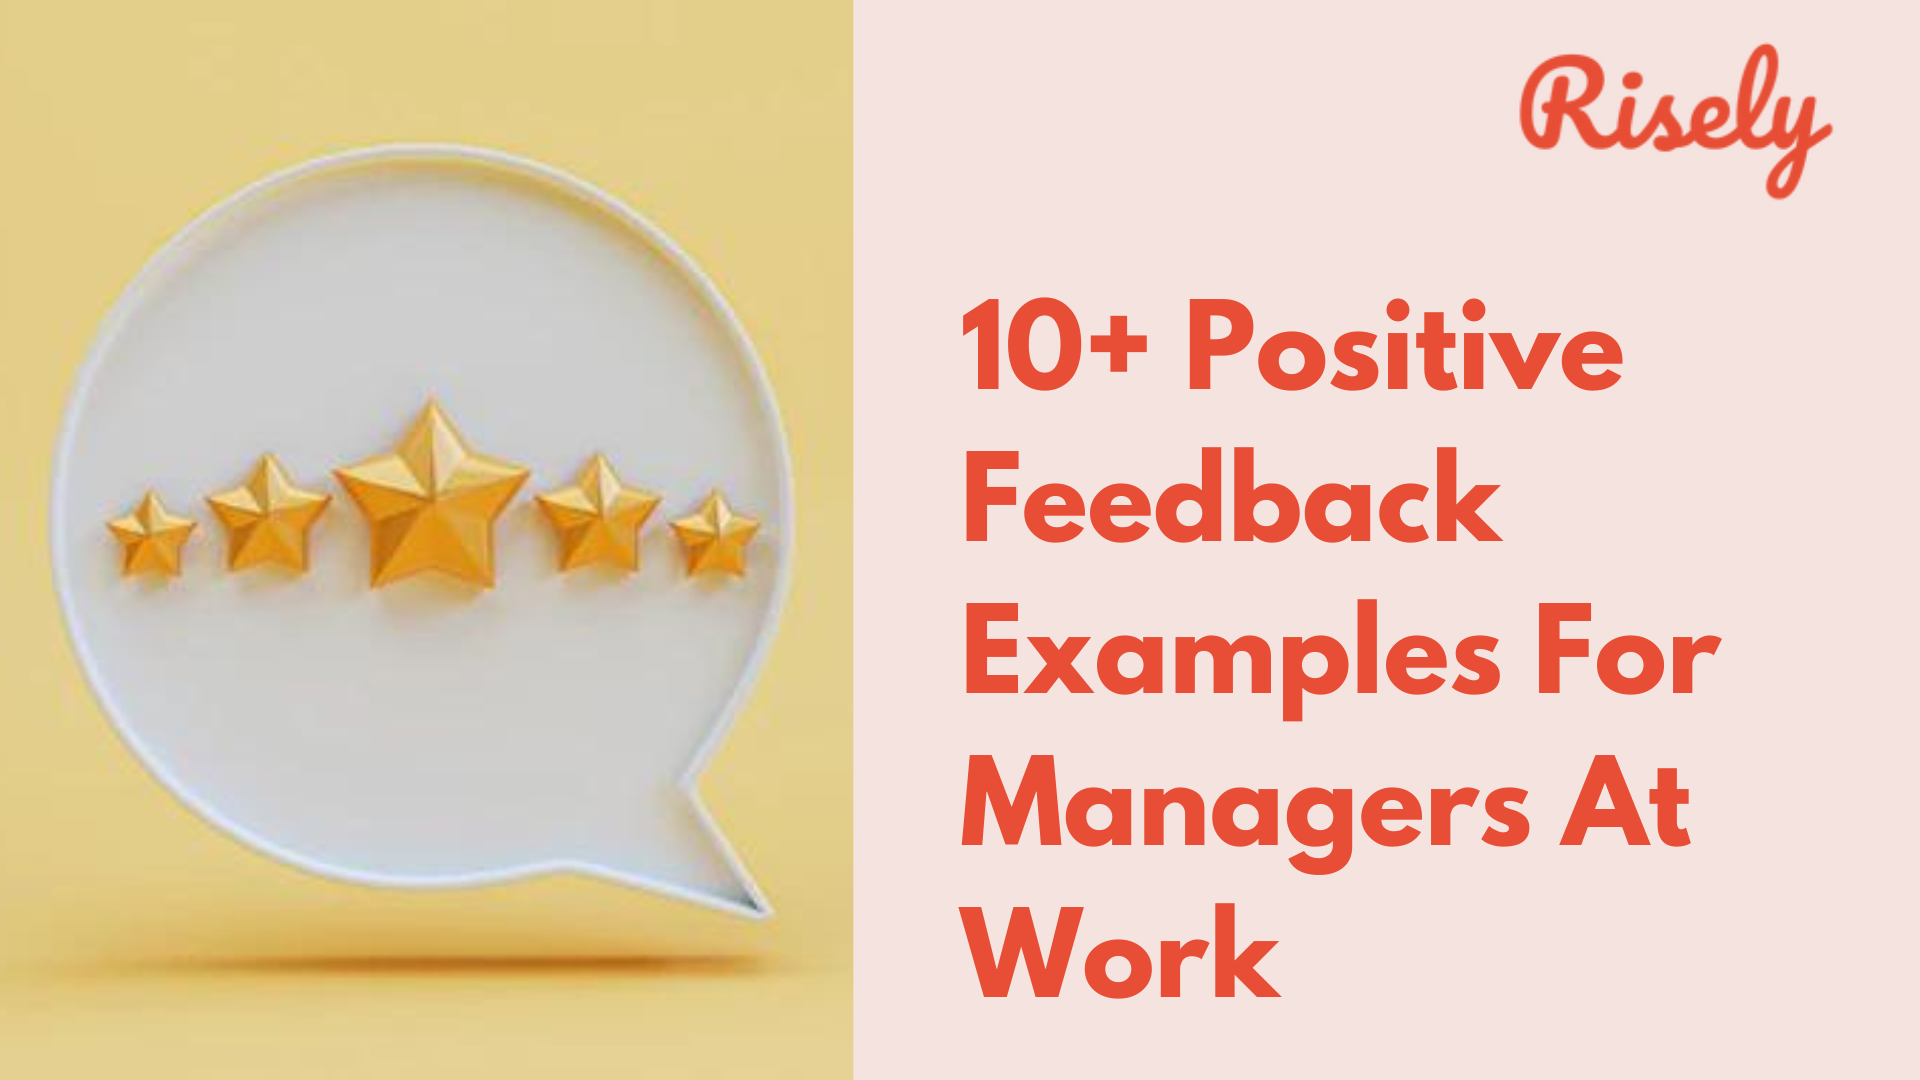 10+ Positive Feedback Examples For Managers At Work